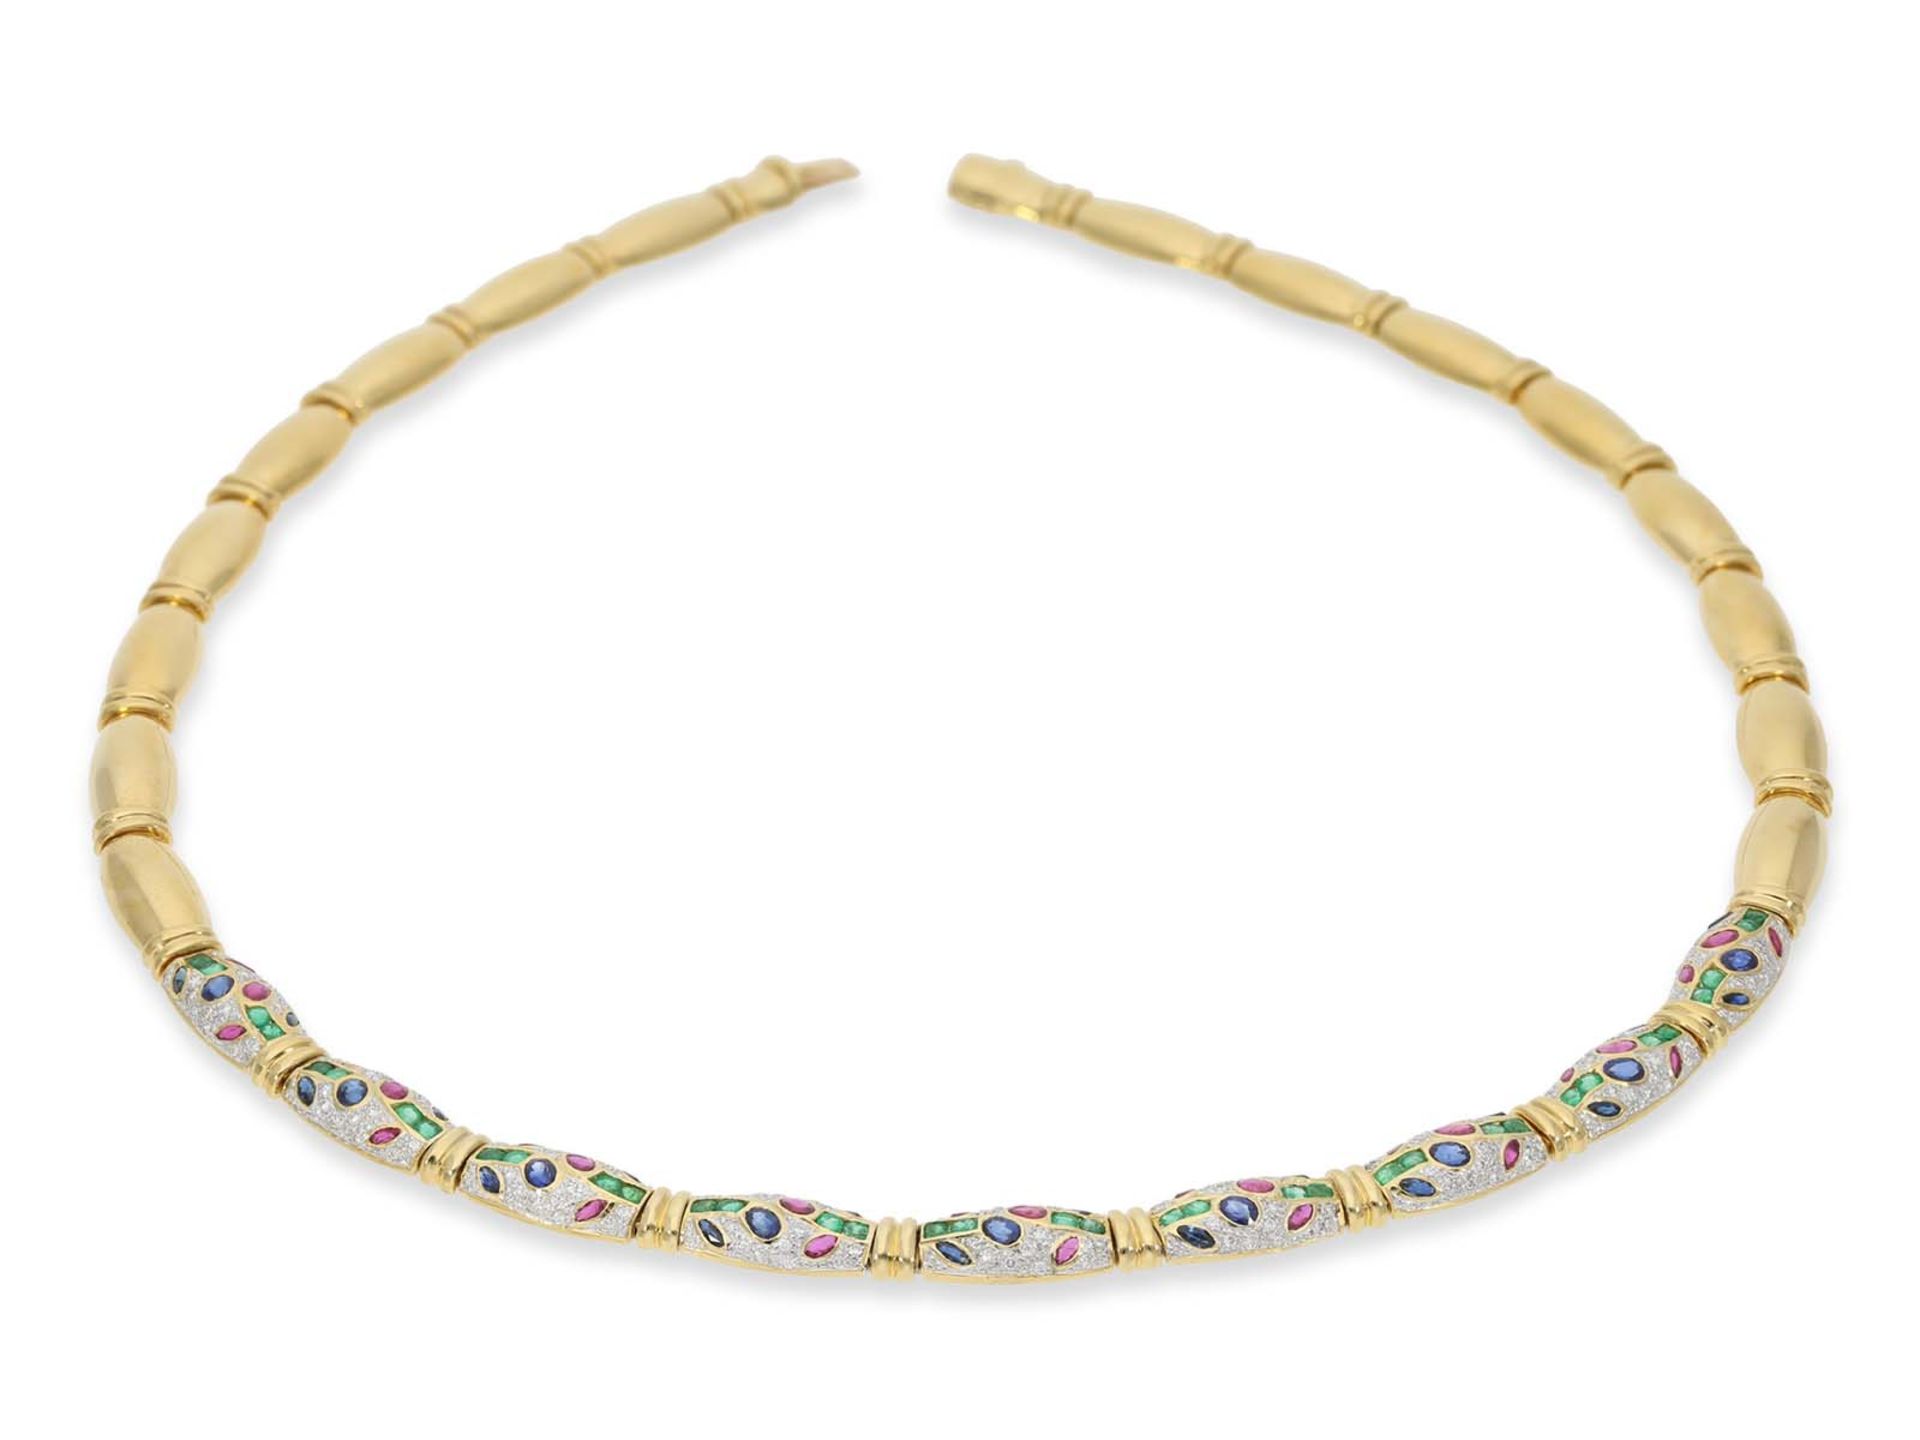 Necklace/Collier/Earrings/Ring: high quality and decorative multicolor 18K gold jewelry set with col - Image 5 of 6